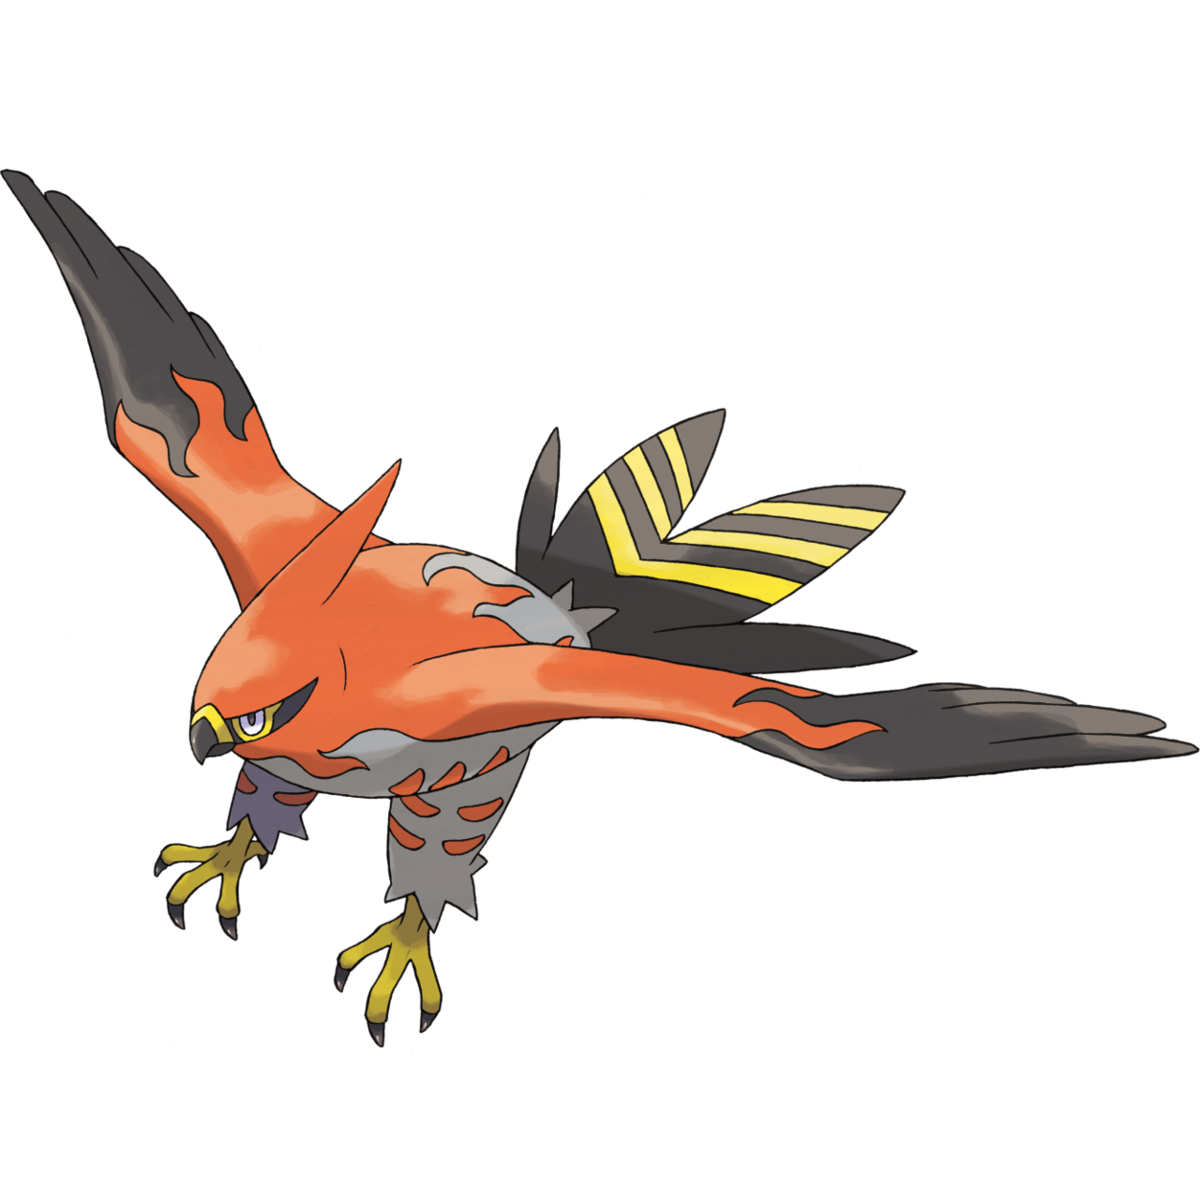 1200px-663Talonflame.png